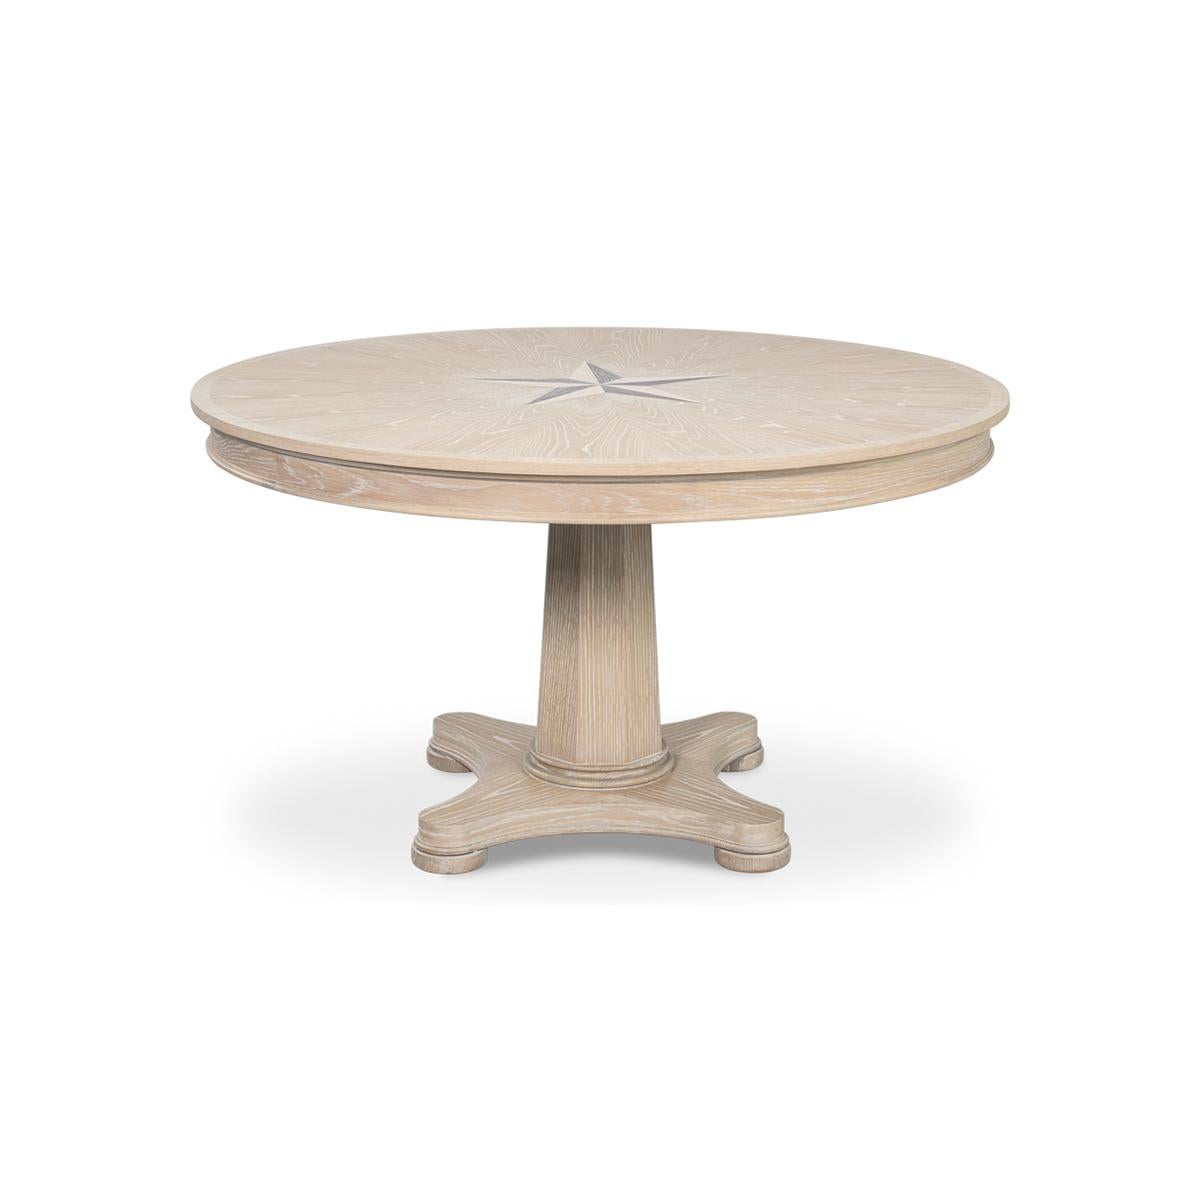 This stunning round oak table is a showcase of craftsmanship and elegance. Designed with a classical touch, the table features a beautiful nautical mariner starburst inlay at the center, creating a compelling focal point that draws the eye. The